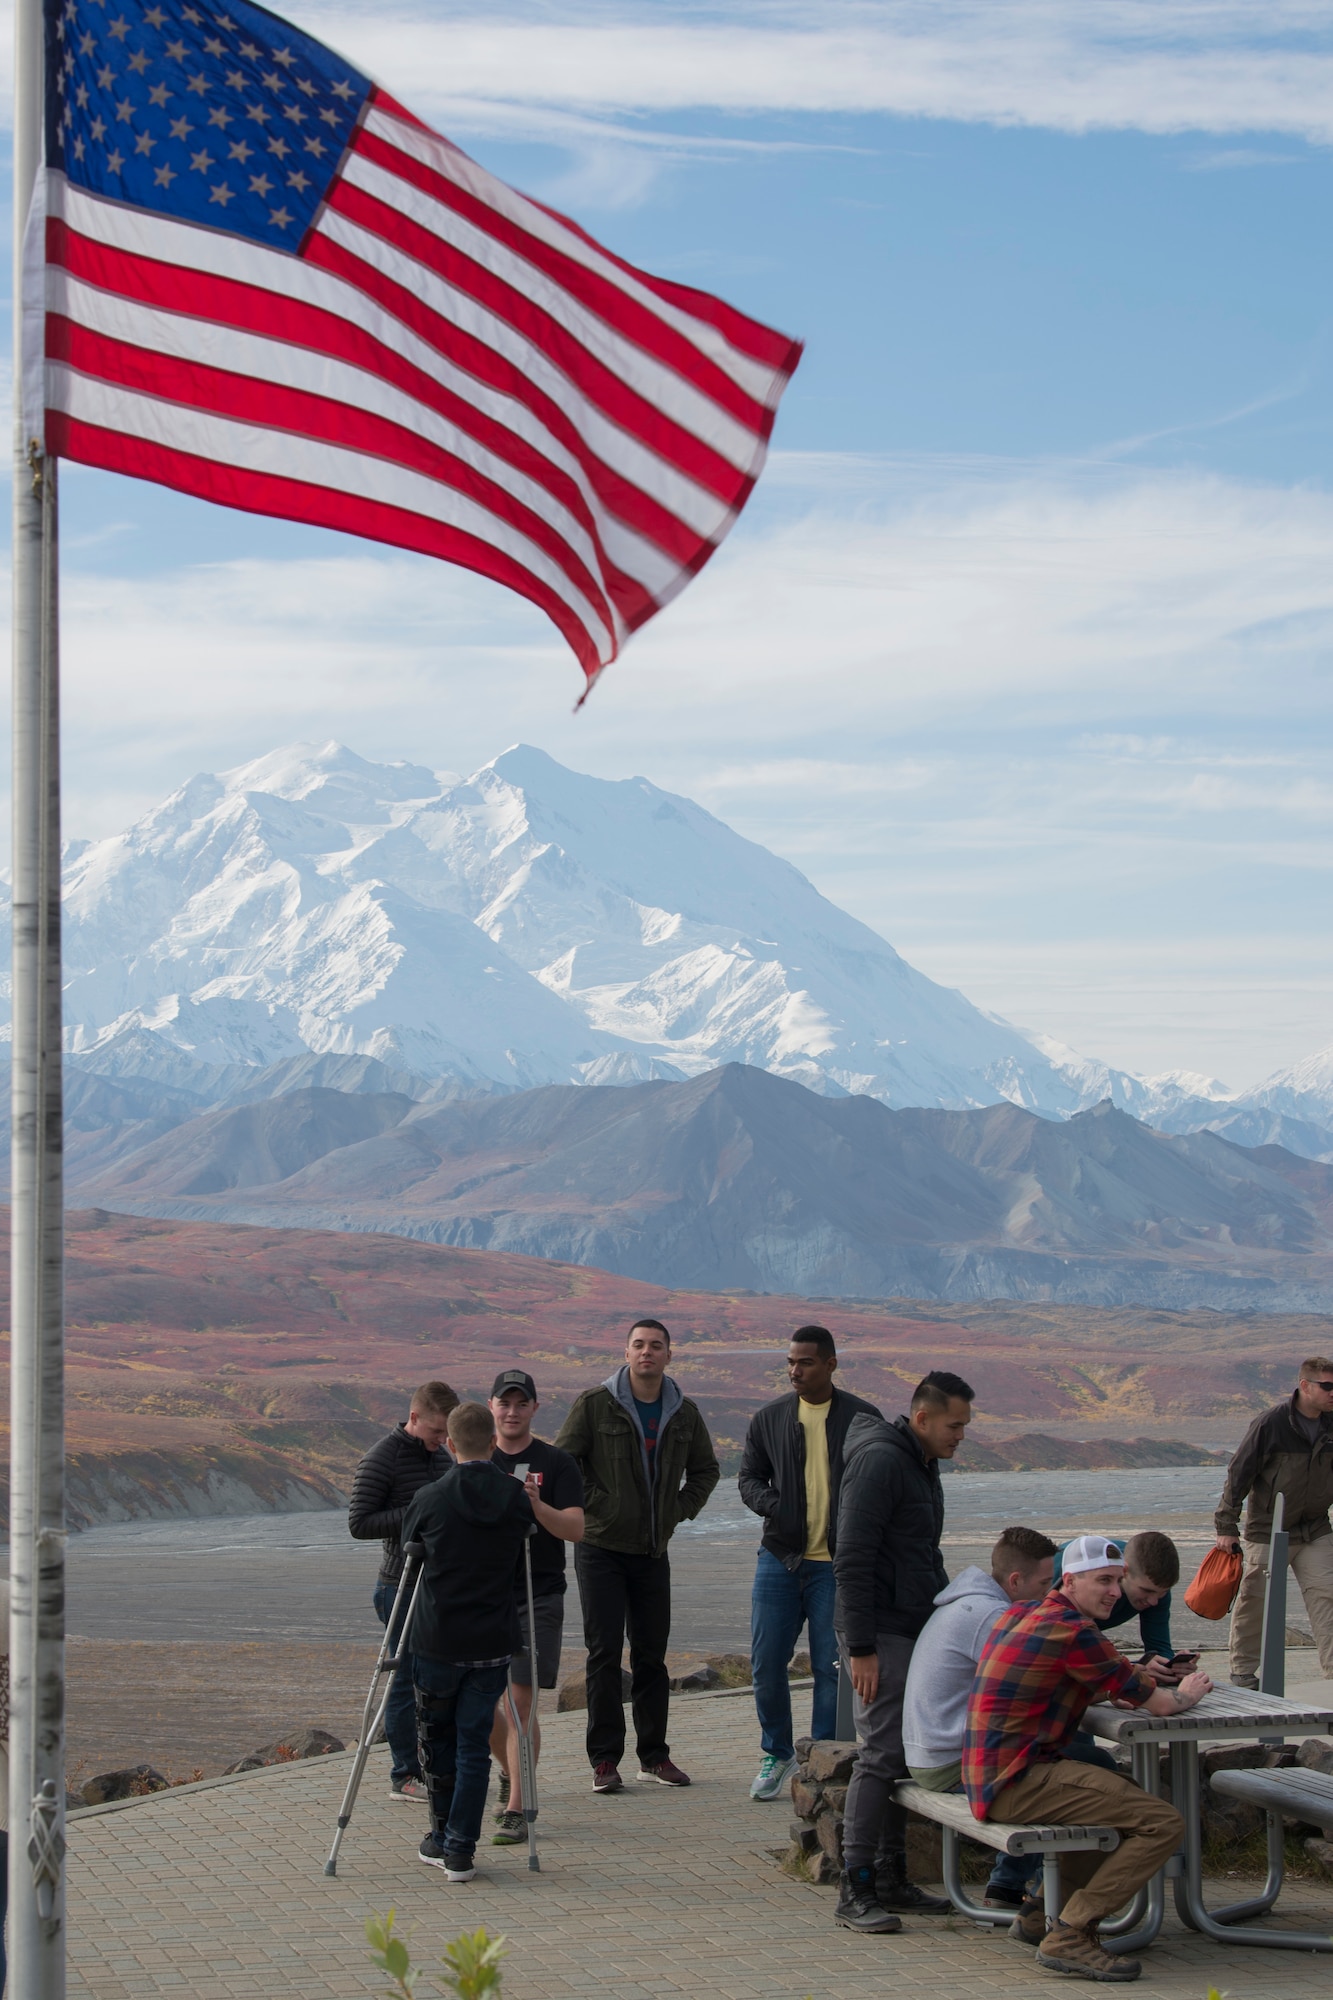 Alaska-based service members discover the Eielson Visitor’s Center area during Military Appreciation Day at Mile 66, Denali National Park and Preserve, Alaska, Sept. 15, 2018. This was the 11th annual Military Appreciation Day which included 400 “road lottery” tickets given out to Alaskan based military members. The Eielson Bluffs area has always been famous for its amazing views of Denali on clear days, and it is not uncommon to see wildlife on the surrounding hillsides.